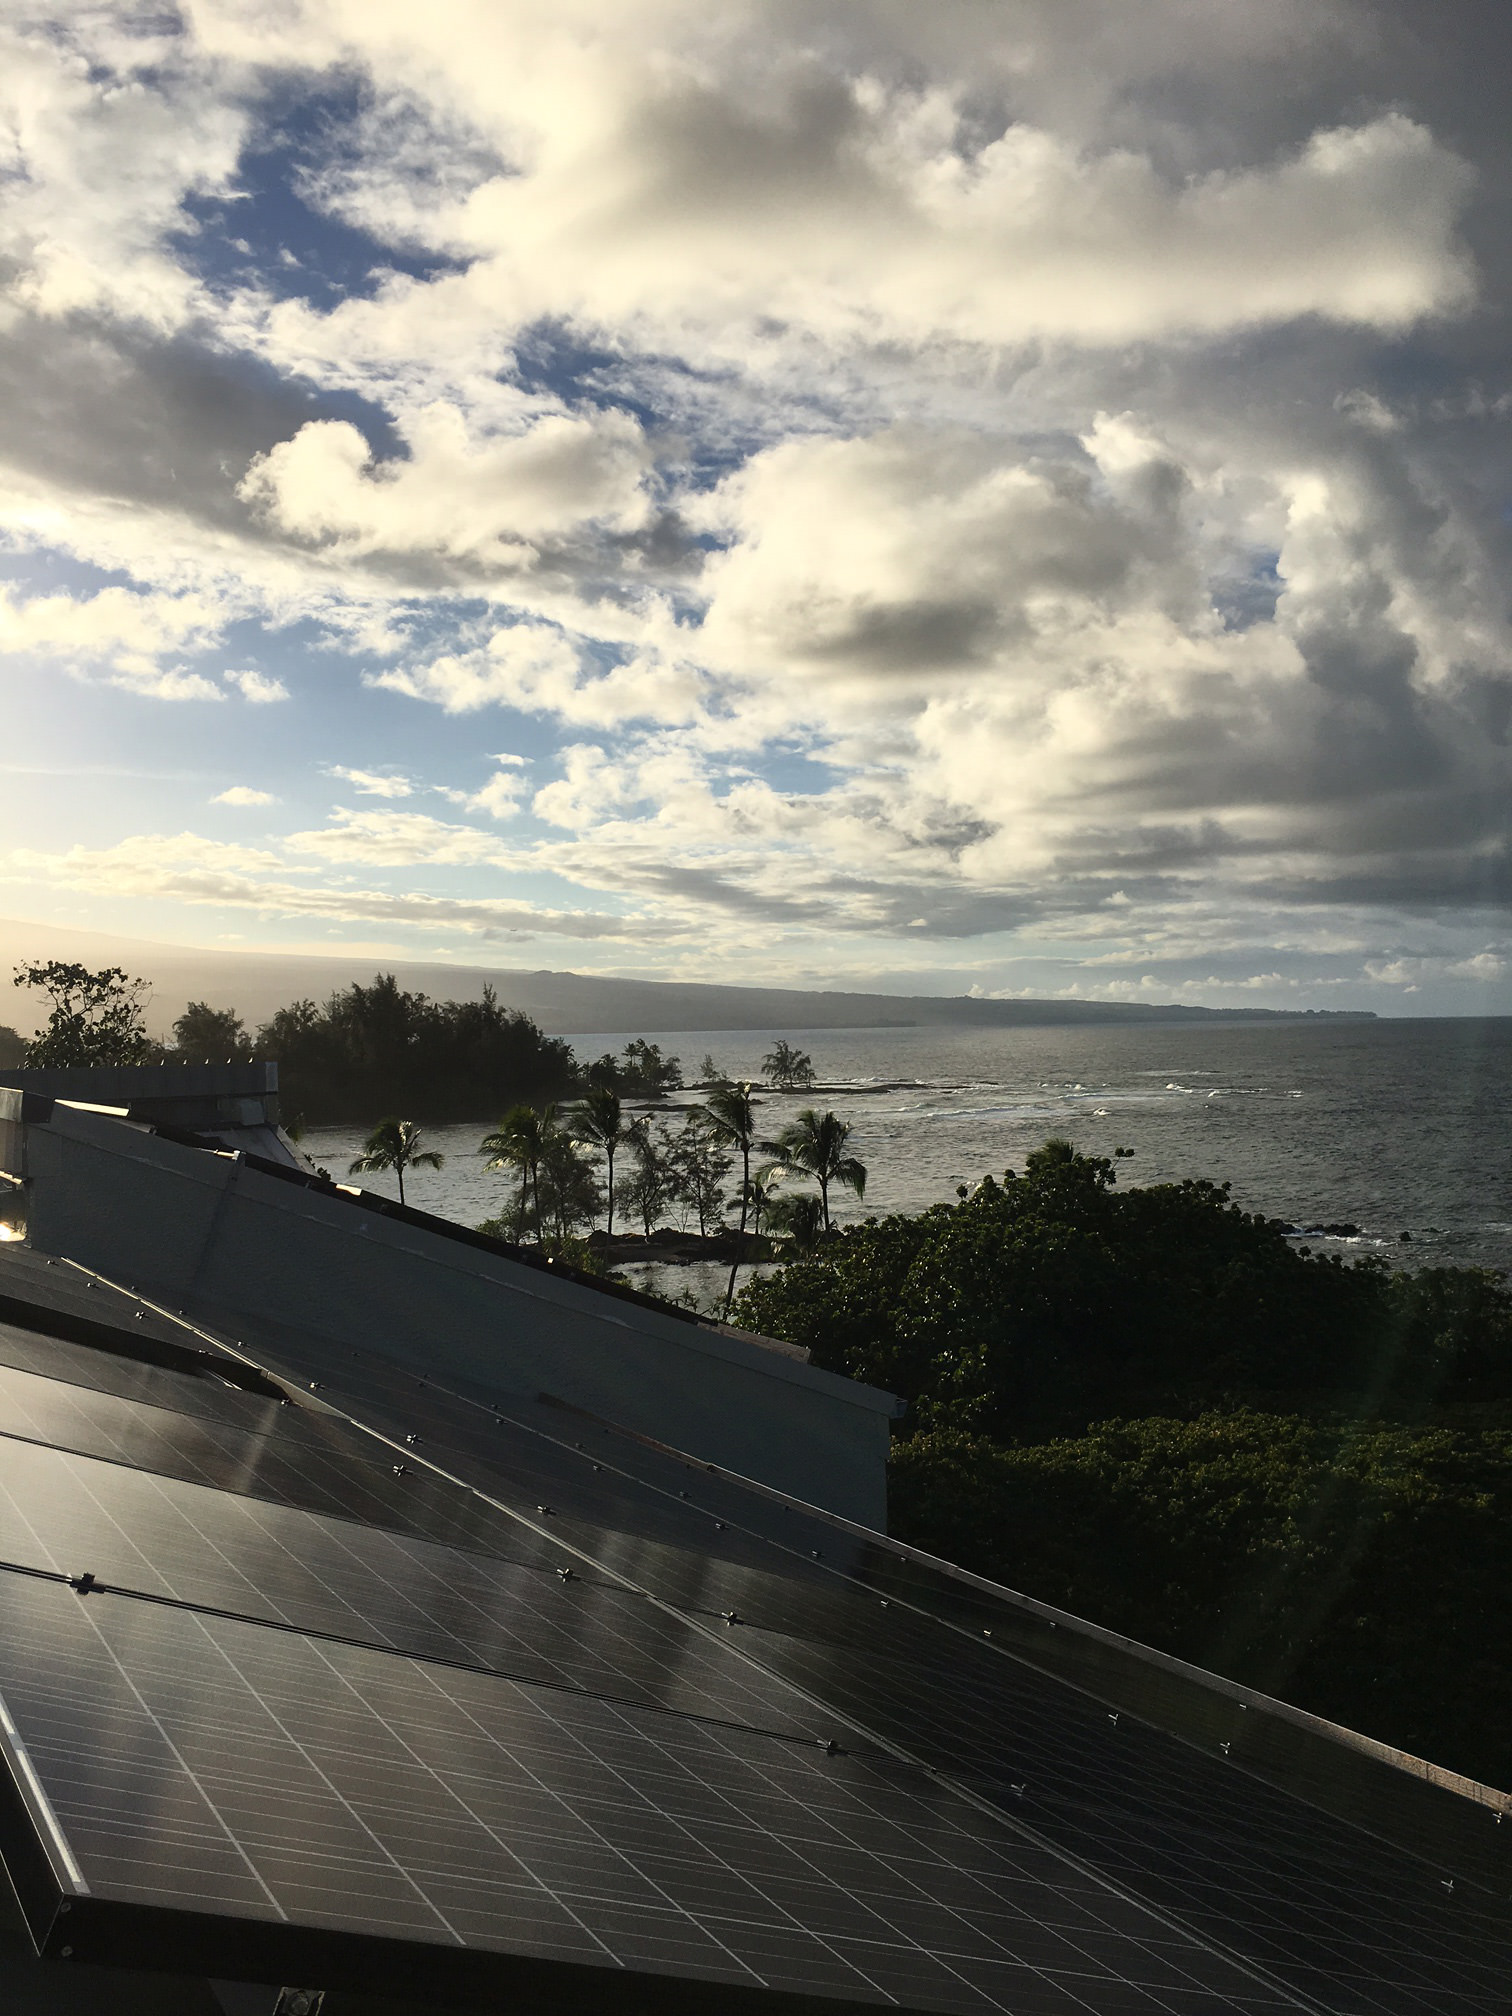  Association of Apartment Owners Hawaii | 83 KW 